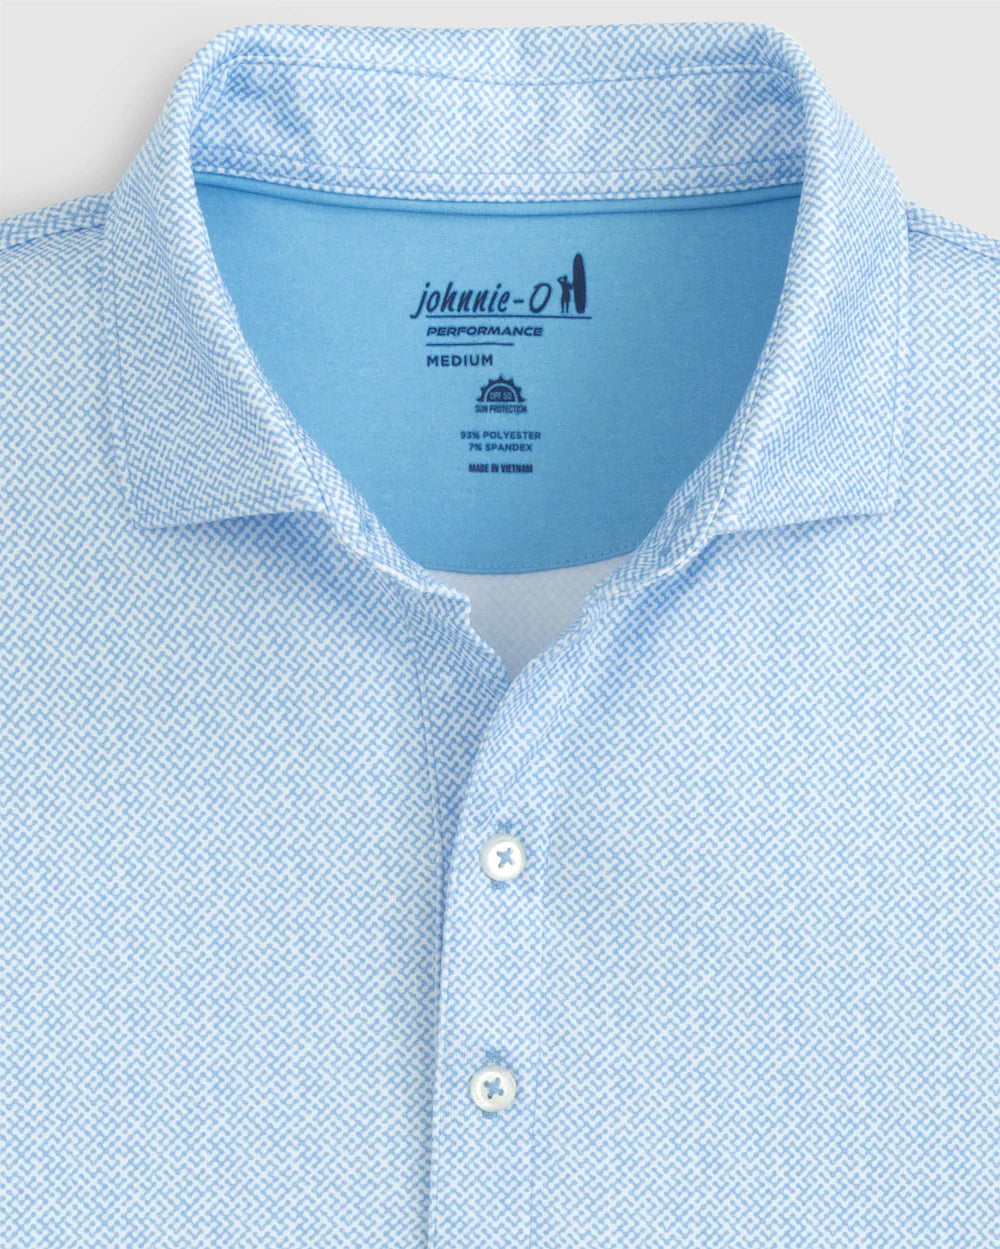 Our classic performance jersey polos are designed to be worn before, during and after the best round you've ever had. Made with a lightweight, moisture-wicking fabric with a comfortable touch of stretch (that also protects&nbsp;with UPF 50), they're a staple in every closet. The Hinson Polo features a "non-solid solid" print that offers a little more intrigue than your standard solid polo.